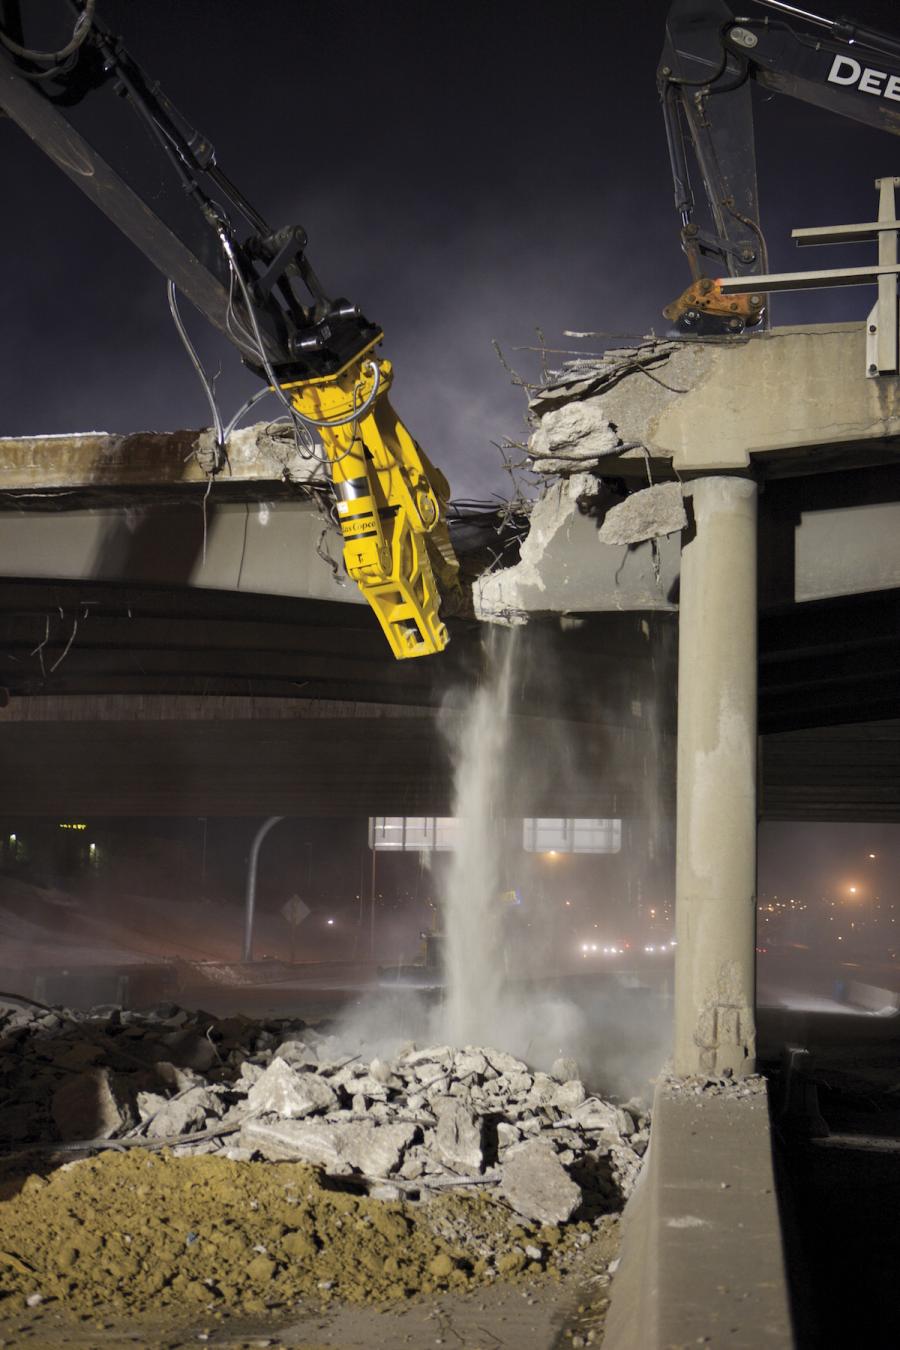 Atlas Copco’s CC Combi Cutter hydraulic attachments maximize operator productivity by rotating 360 degrees. The crushing or cutting power comes from two powerful hydraulic cylinders above the jaws.